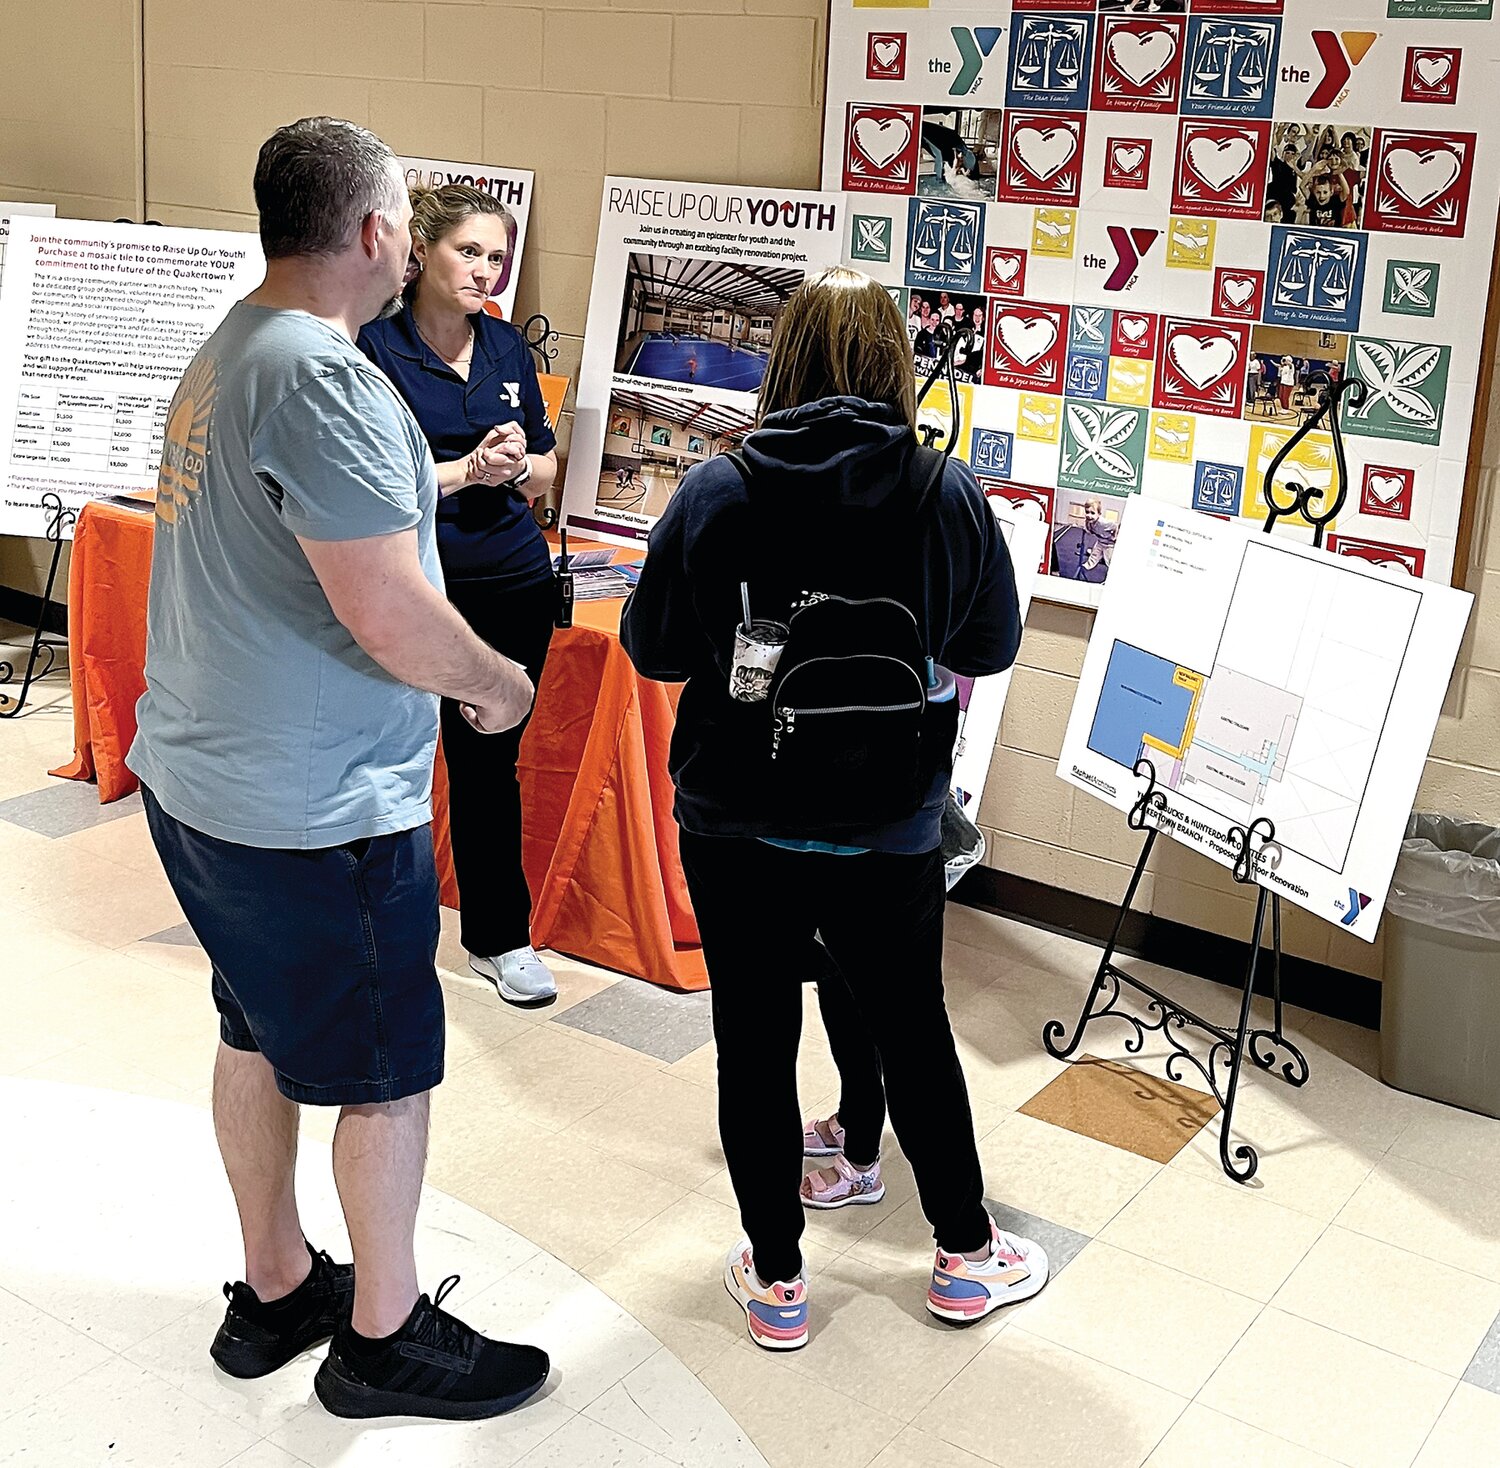 Allyson Fox, vice president of operations for Upper Bucks Region of YMCA of Bucks and Hunterdon Counties, discusses the Raise Up Our Youth campaign with visitors at the Quakertown branch campaign launch on April 26.